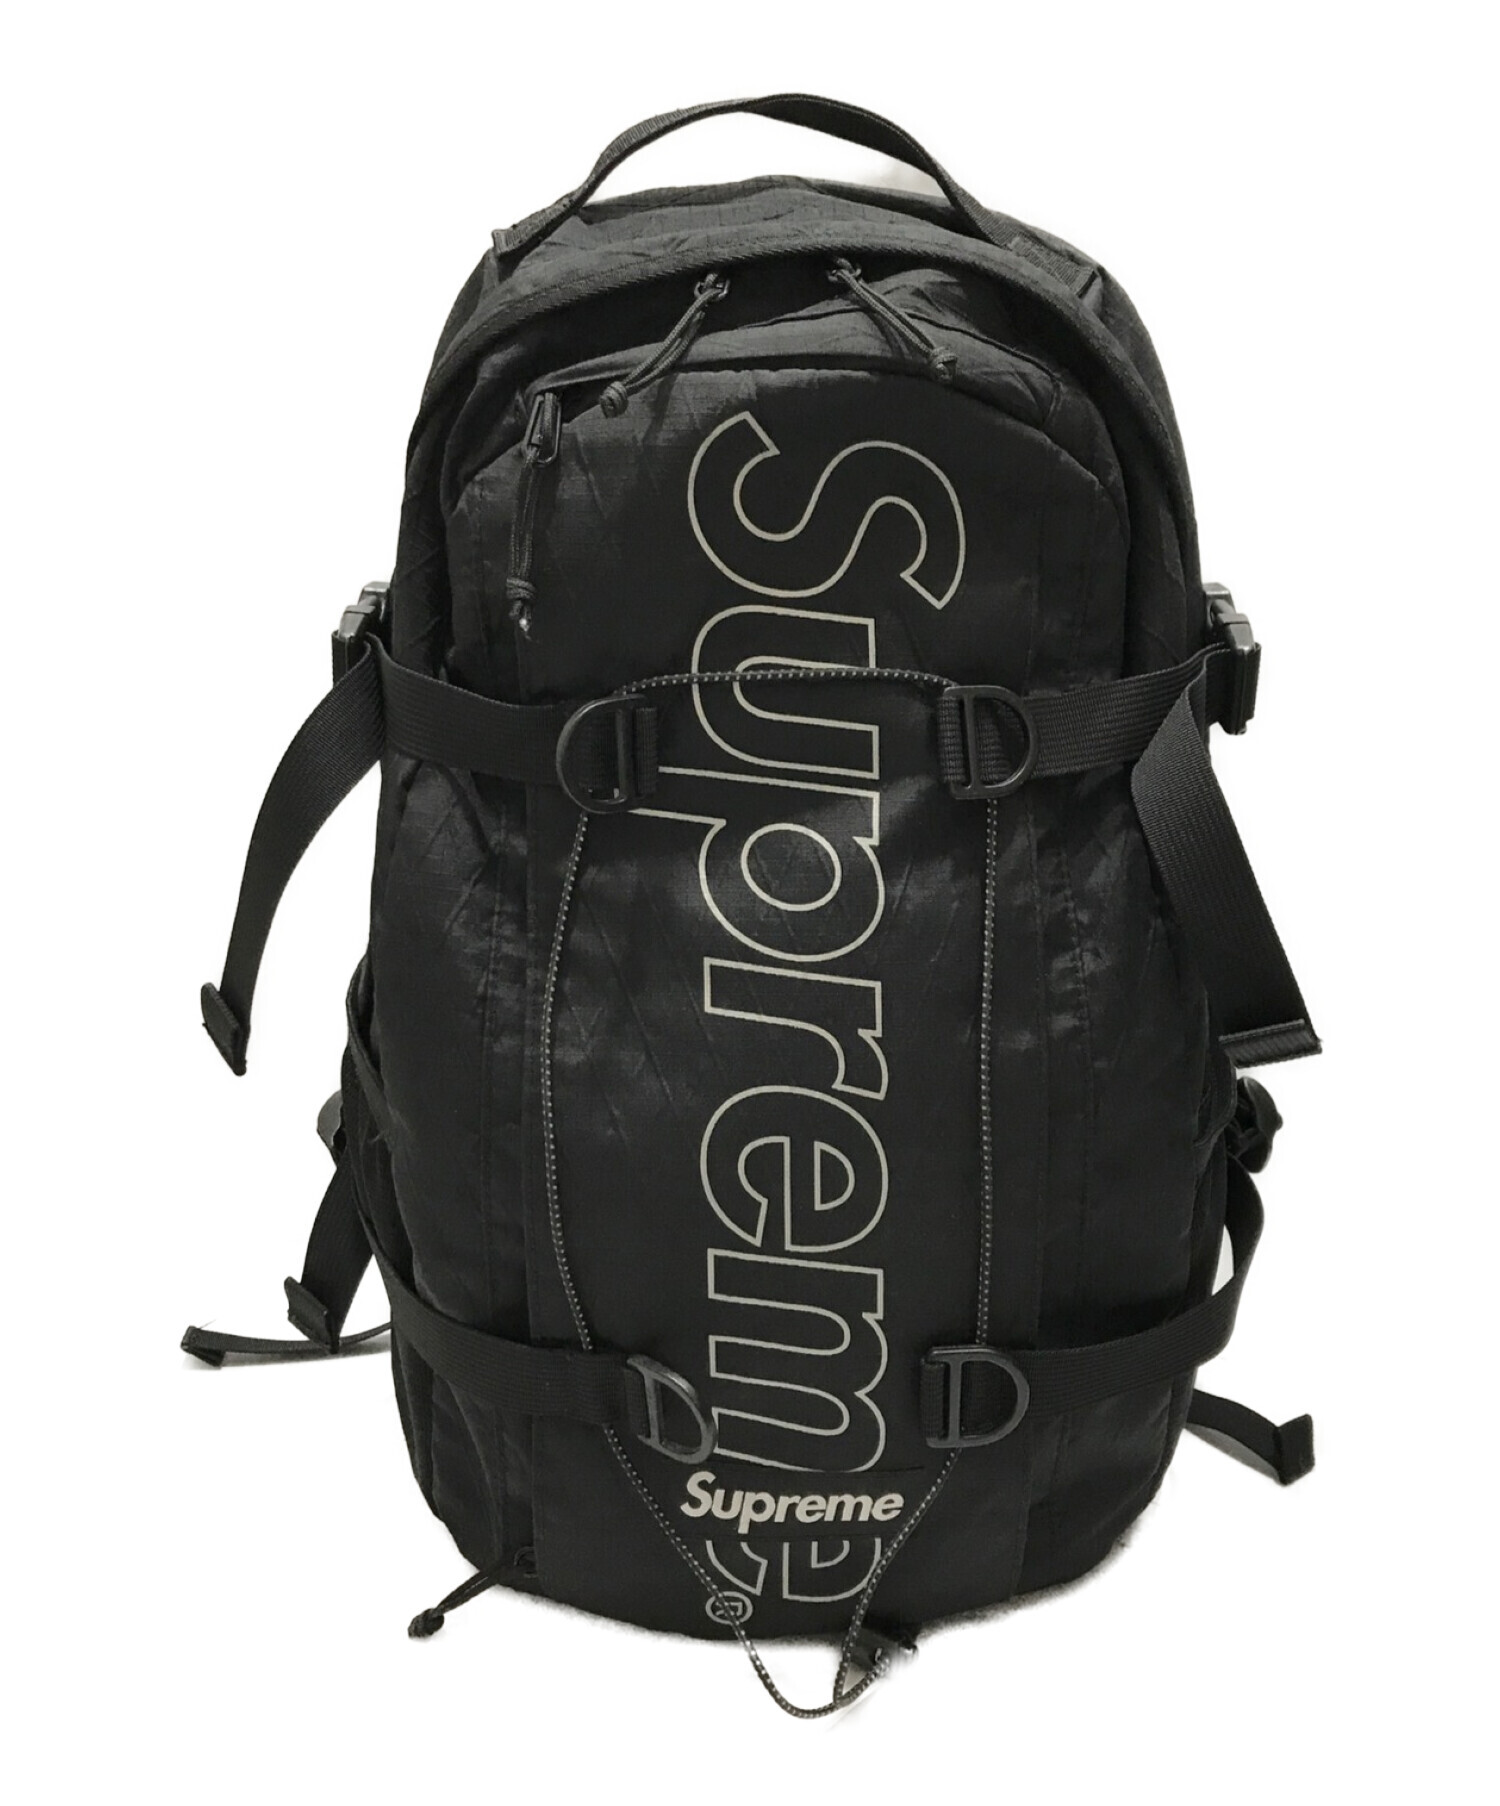 Supreme 18fw 18aw Backpack バッグパック リュック-